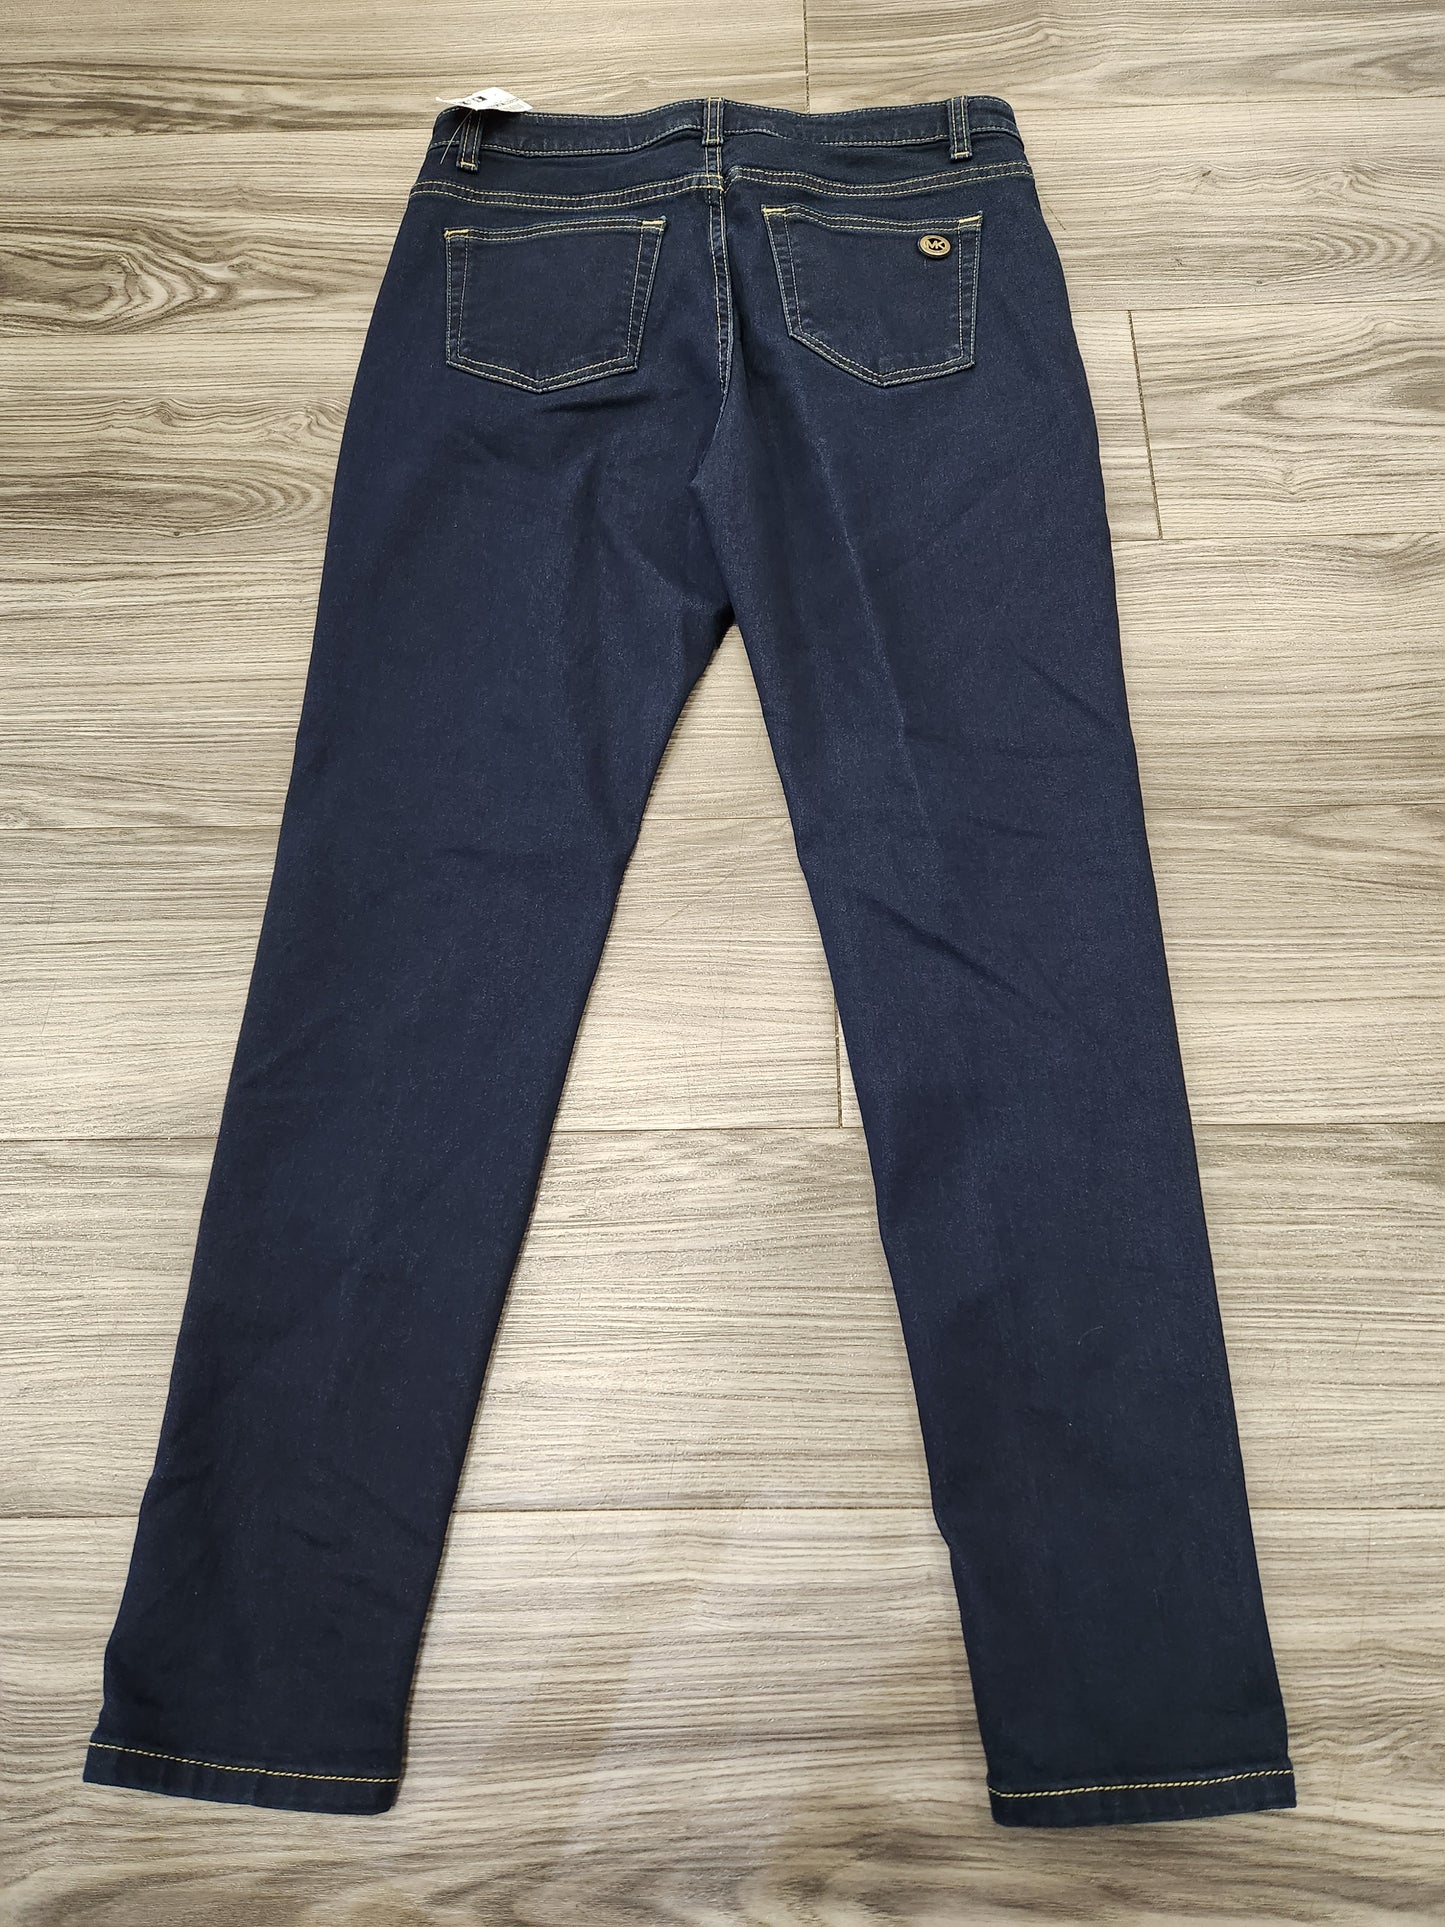 Jeans Skinny By Michael By Michael Kors  Size: 10